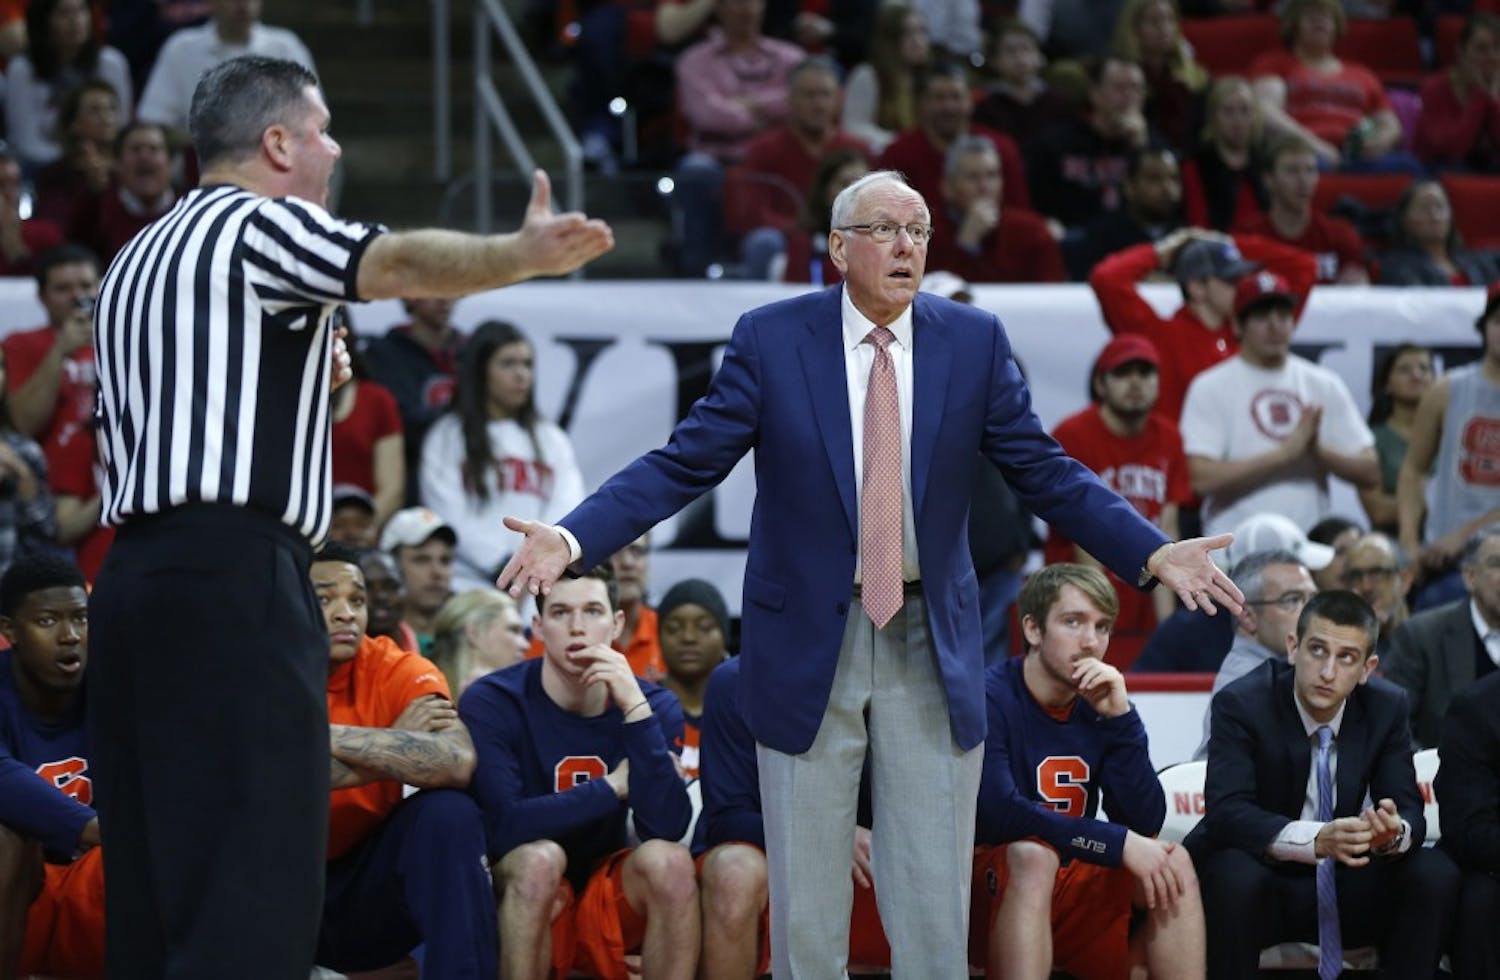 Syracuse head coach Jim Boeheim can't believe an official's call during the first half against North Carolina State at PNC Arena in Raleigh, N.C., on Saturday, March 7, 2015. N.C. State won, 71-57. (Ethan Hyman/Raleigh News & Observer/TNS)